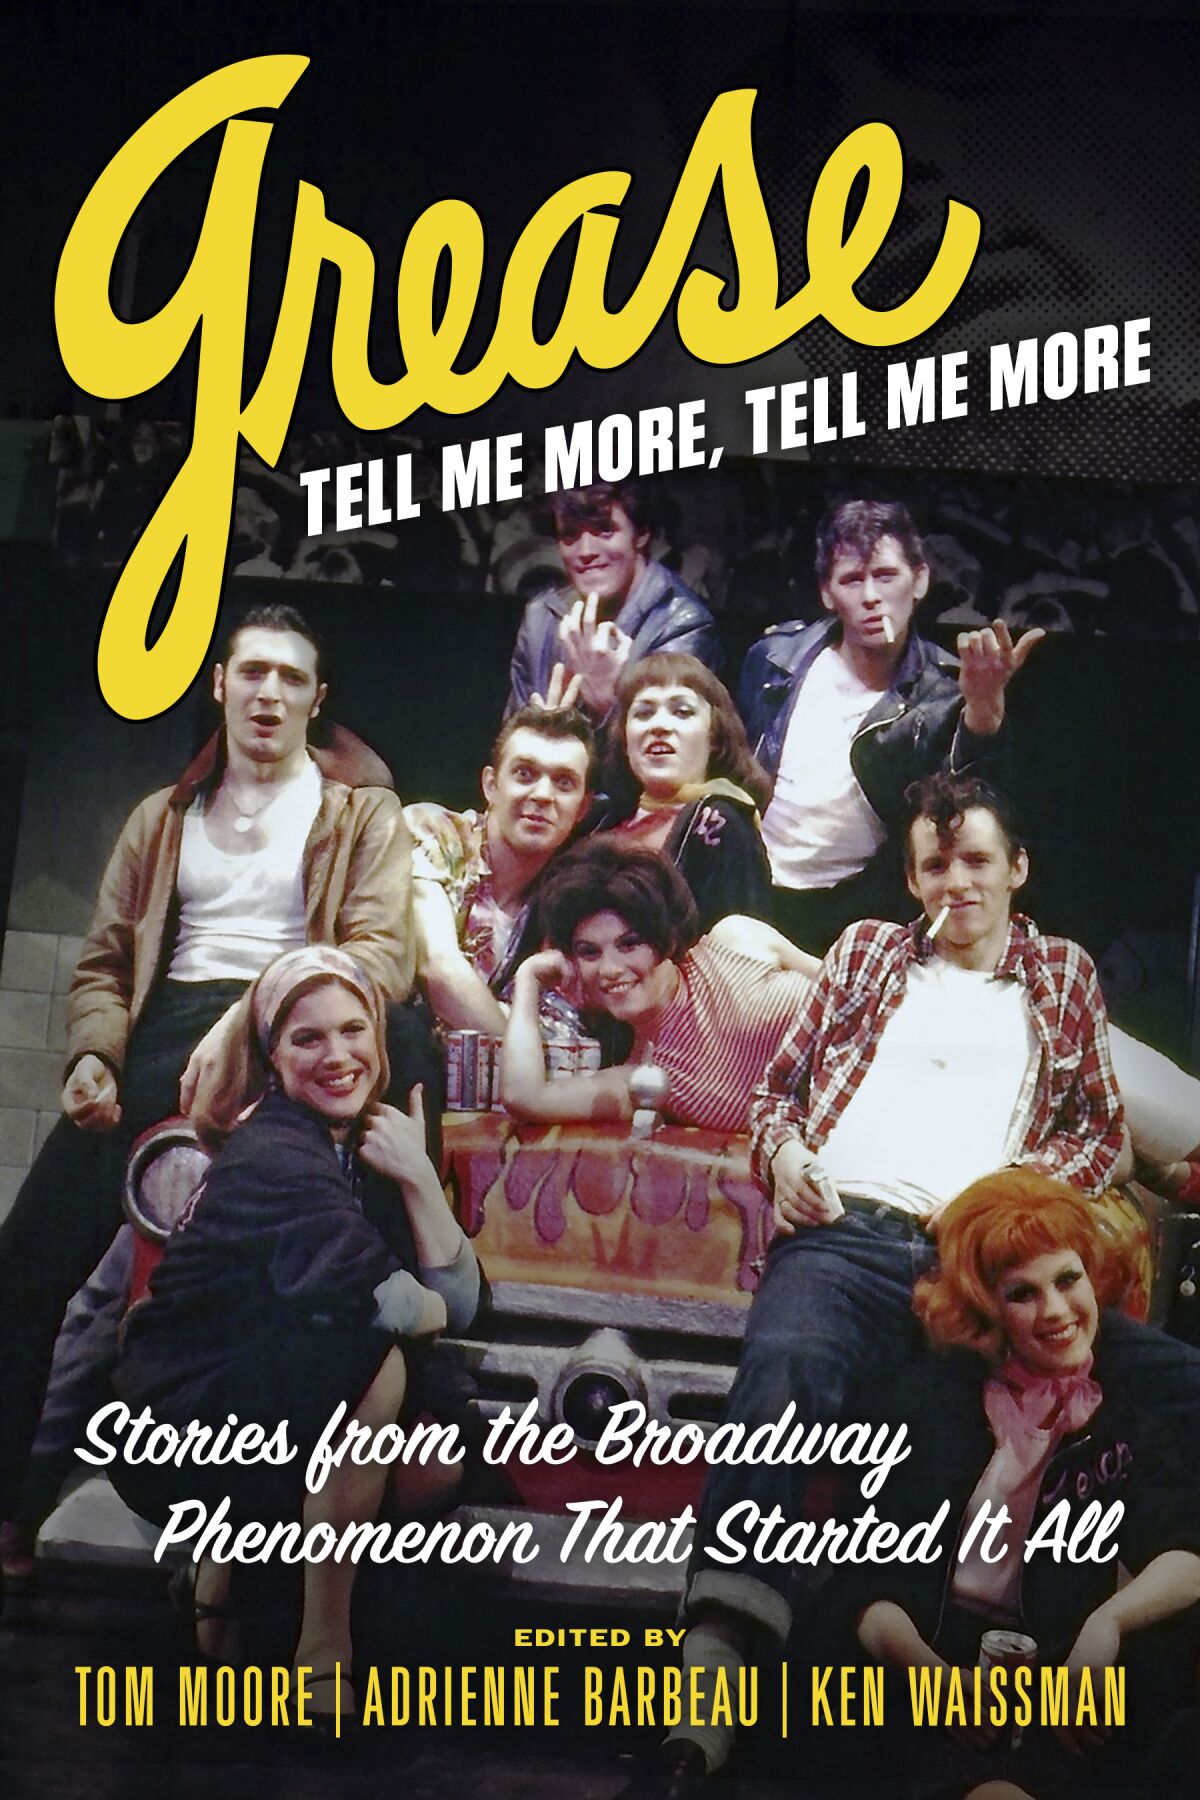 This image released by the Chicago Review Press shows "Grease, Tell Me More, Tell Me More: Stories from the Broadway Phenomenon That Started It All." The book culled from stories submitted by some 100 cast and crew from the 1972 musical. (Chicago Review Press via AP)